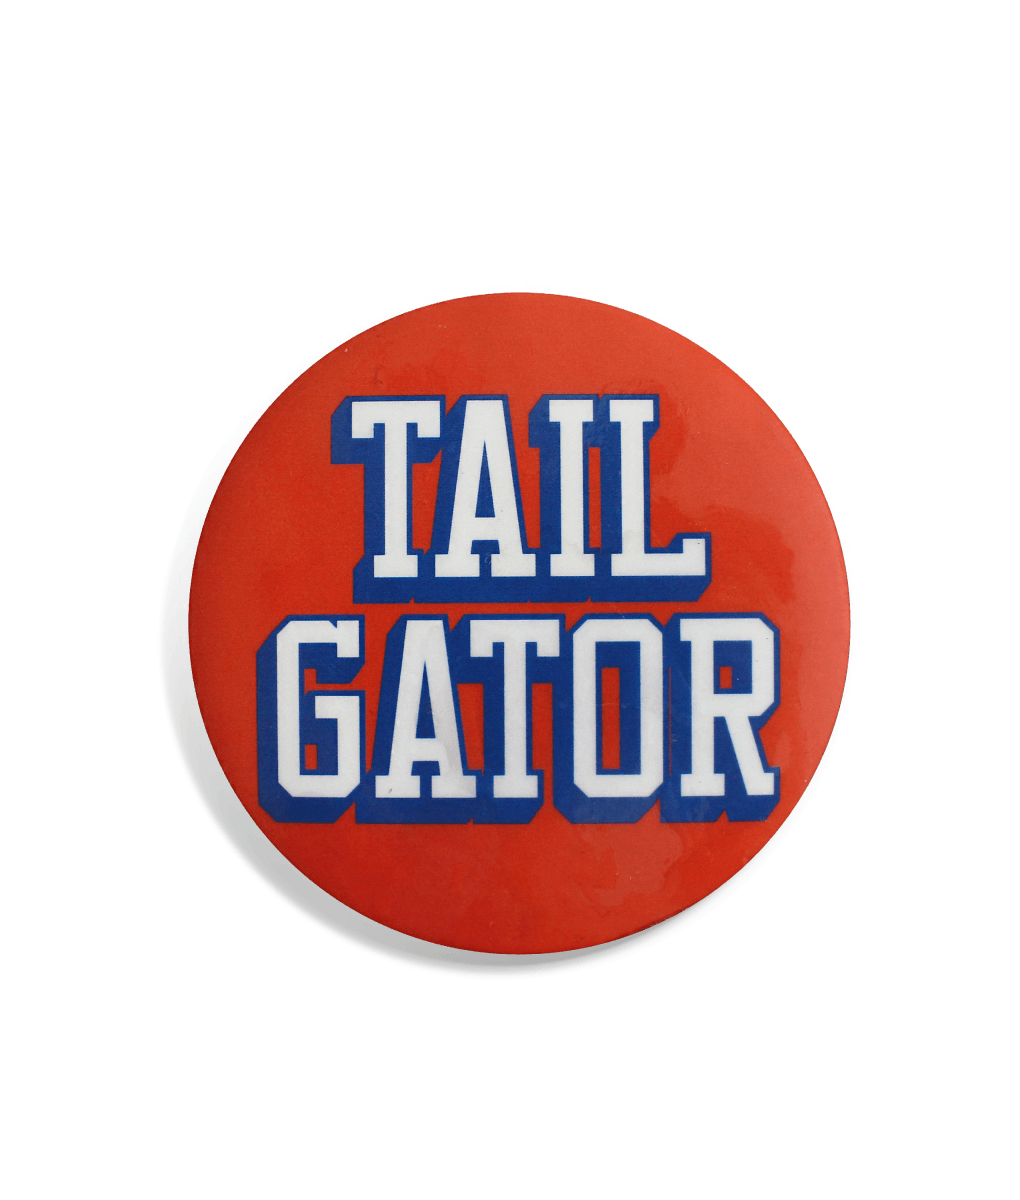 Tail Gator Button - Shop B-Unlimited